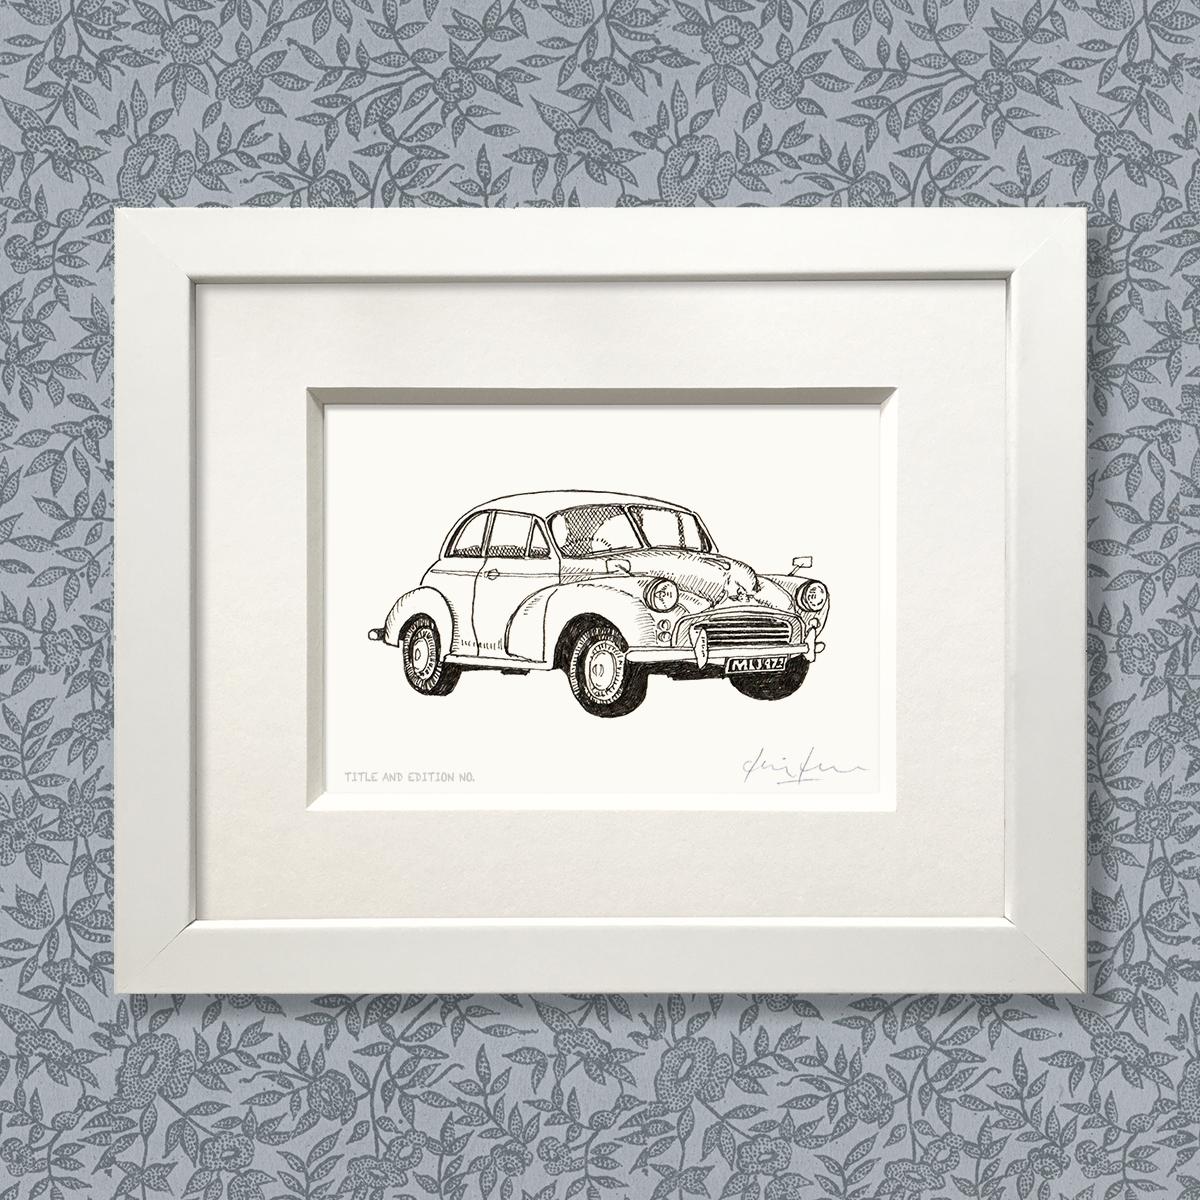 Limited edition print from pen and ink drawing of a Morris Minor in a white frame